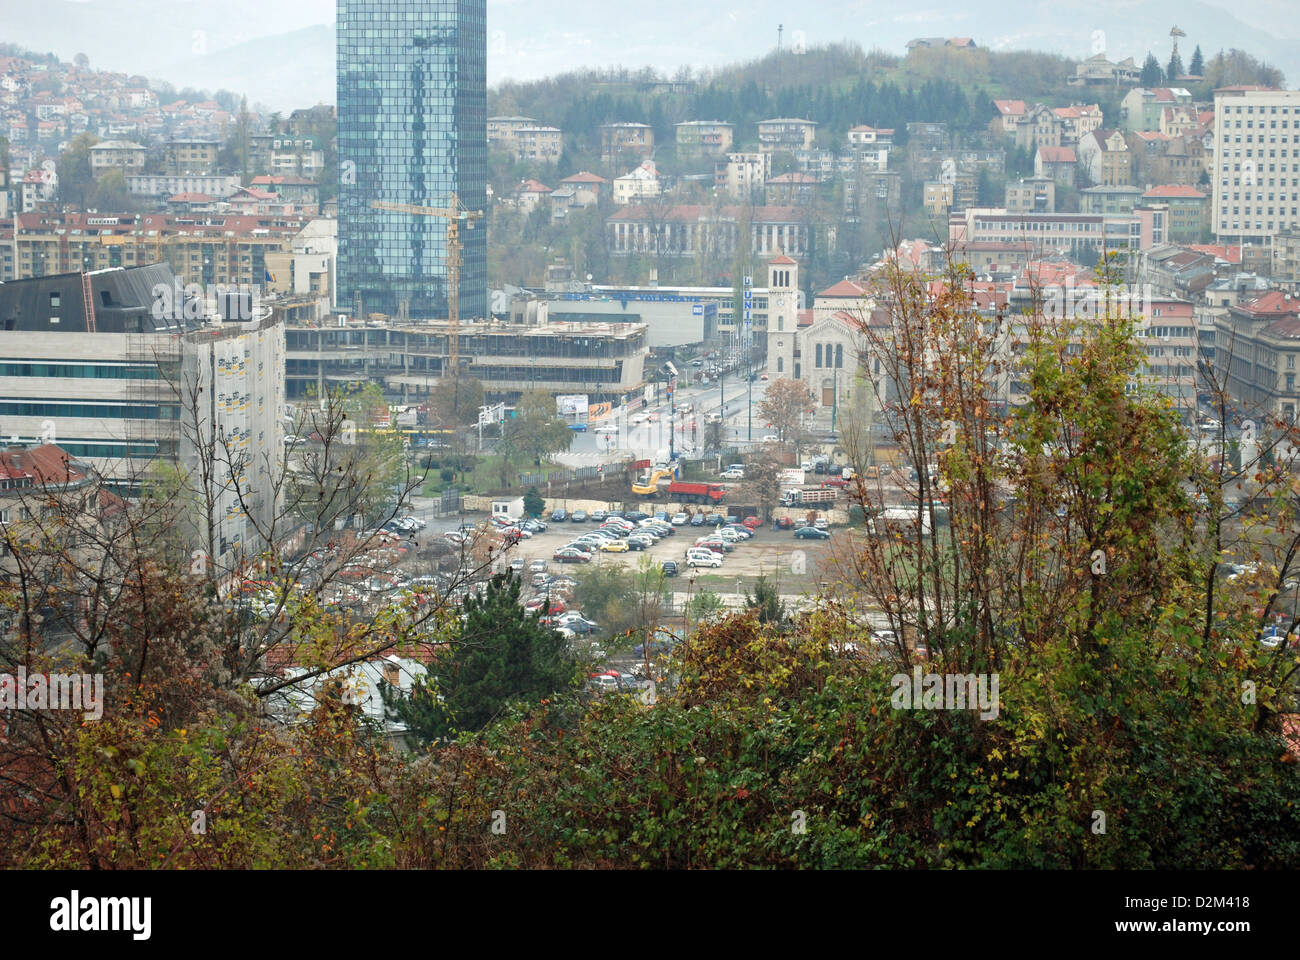 A Bosnian Serb sniper's view of Sarajevo from the old Jewish cemetery on Mount Trebevic above the city. Stock Photo